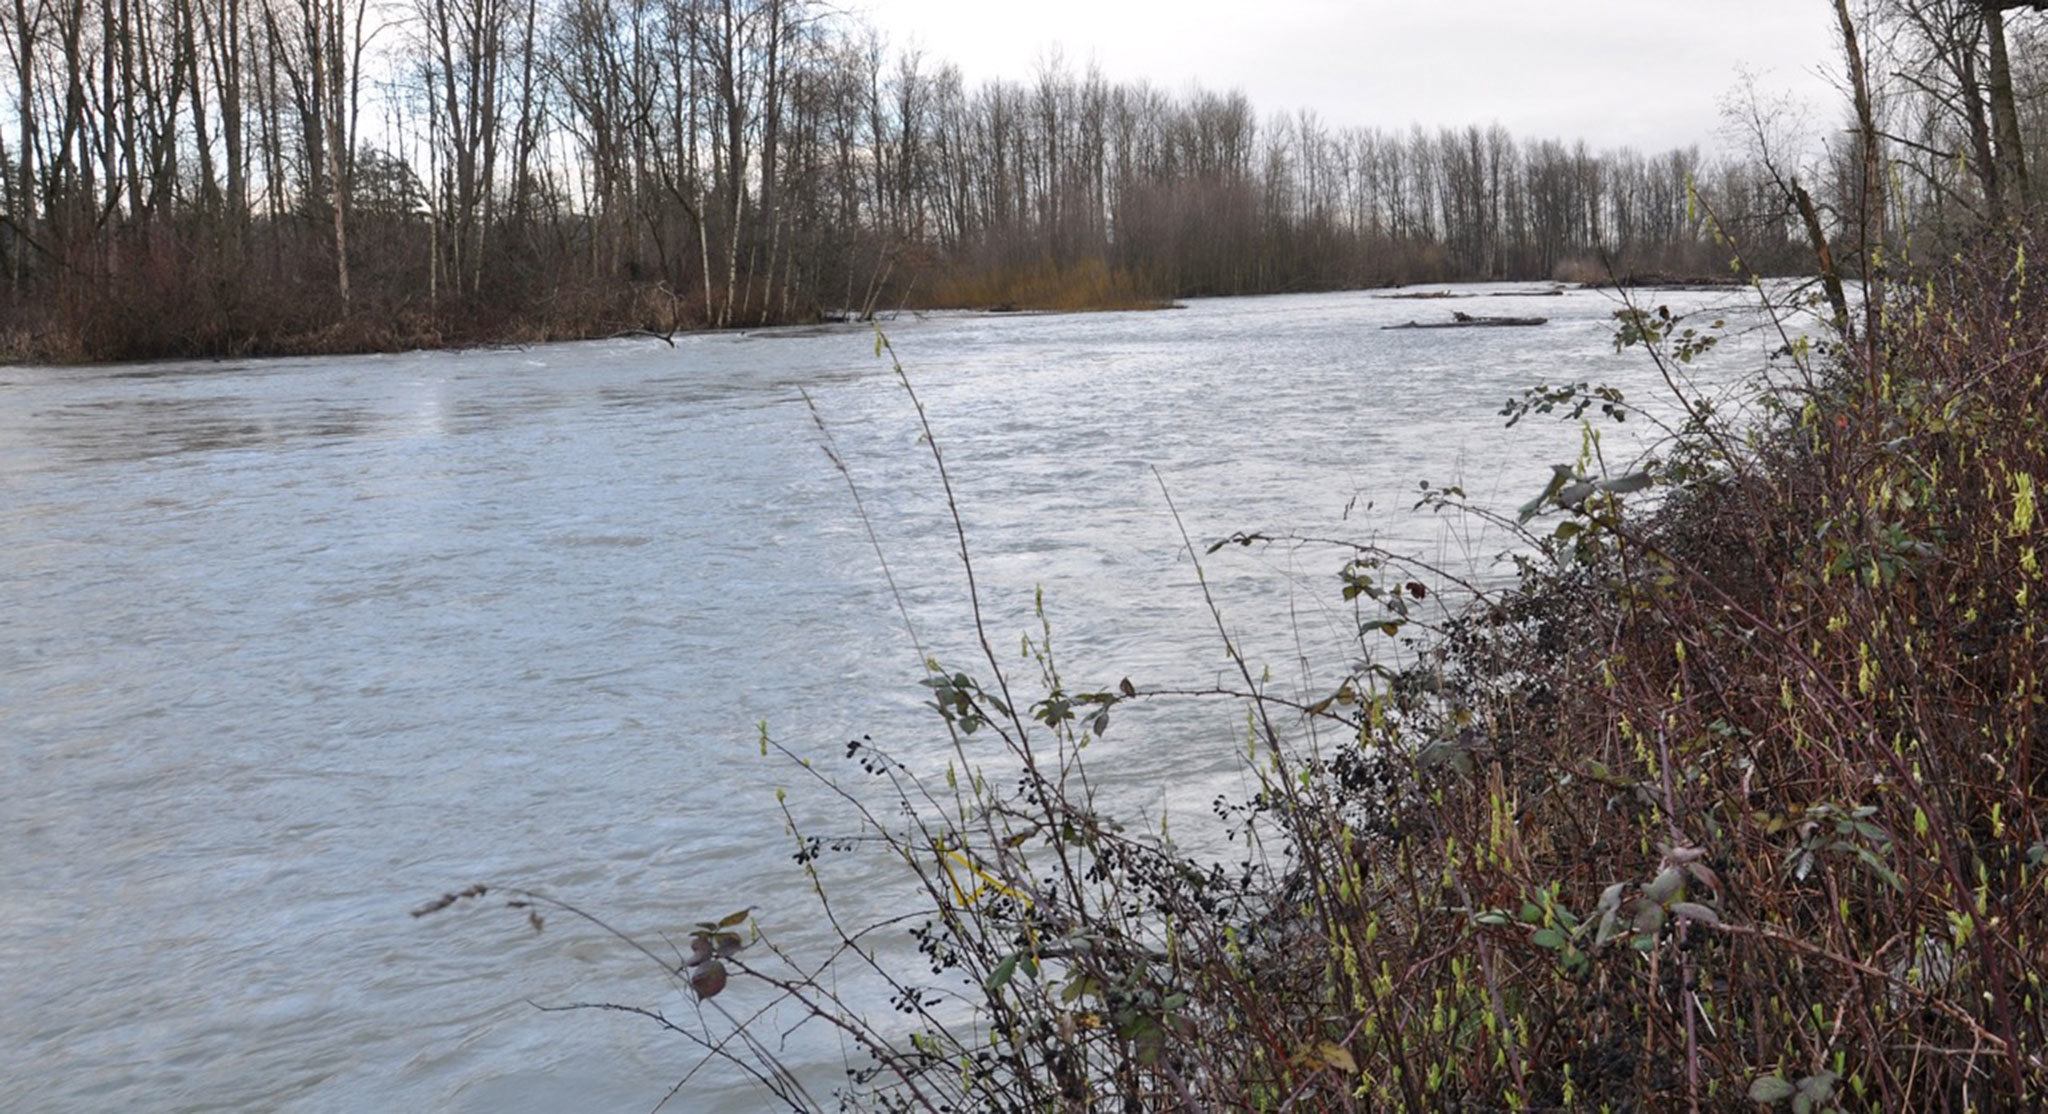 County officials remain concerned about the flood-prone White River in Pacific. The Flood Control District budget will provide funding to complete construction of the Countyline setback project and to monitor flood water levels with new gauges along the river. RACHEL CIAMPI, Auburn Reporter